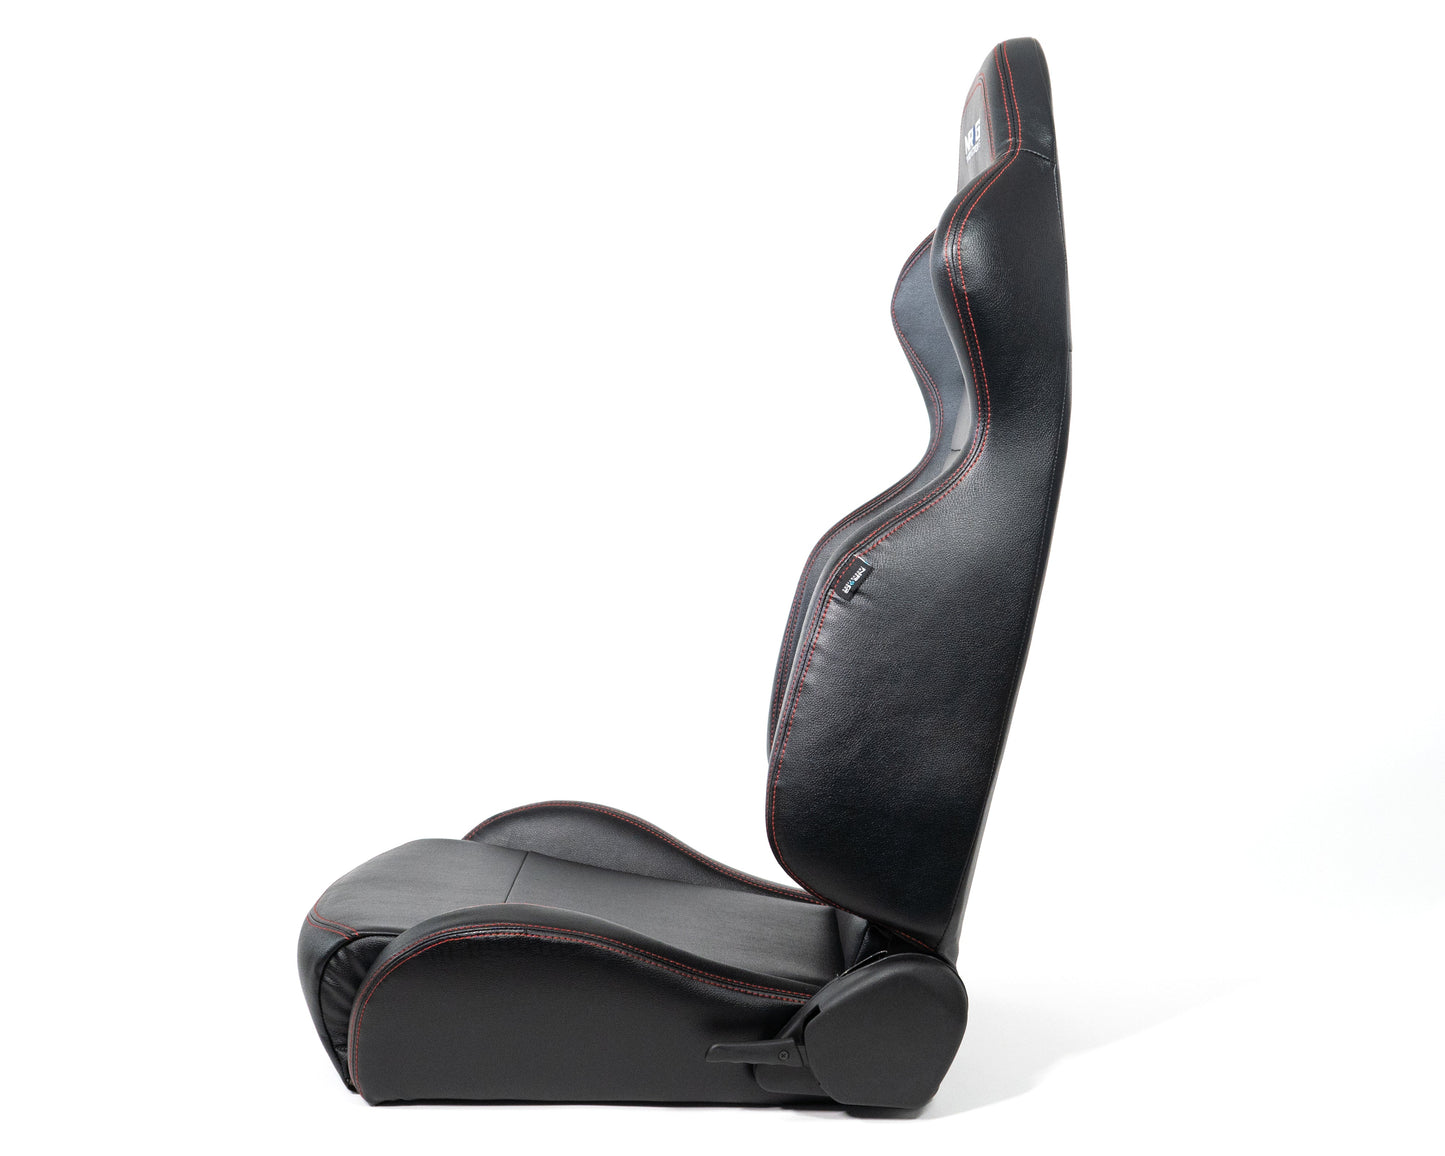 NRG Reclinable Racing Seat Red Stitching